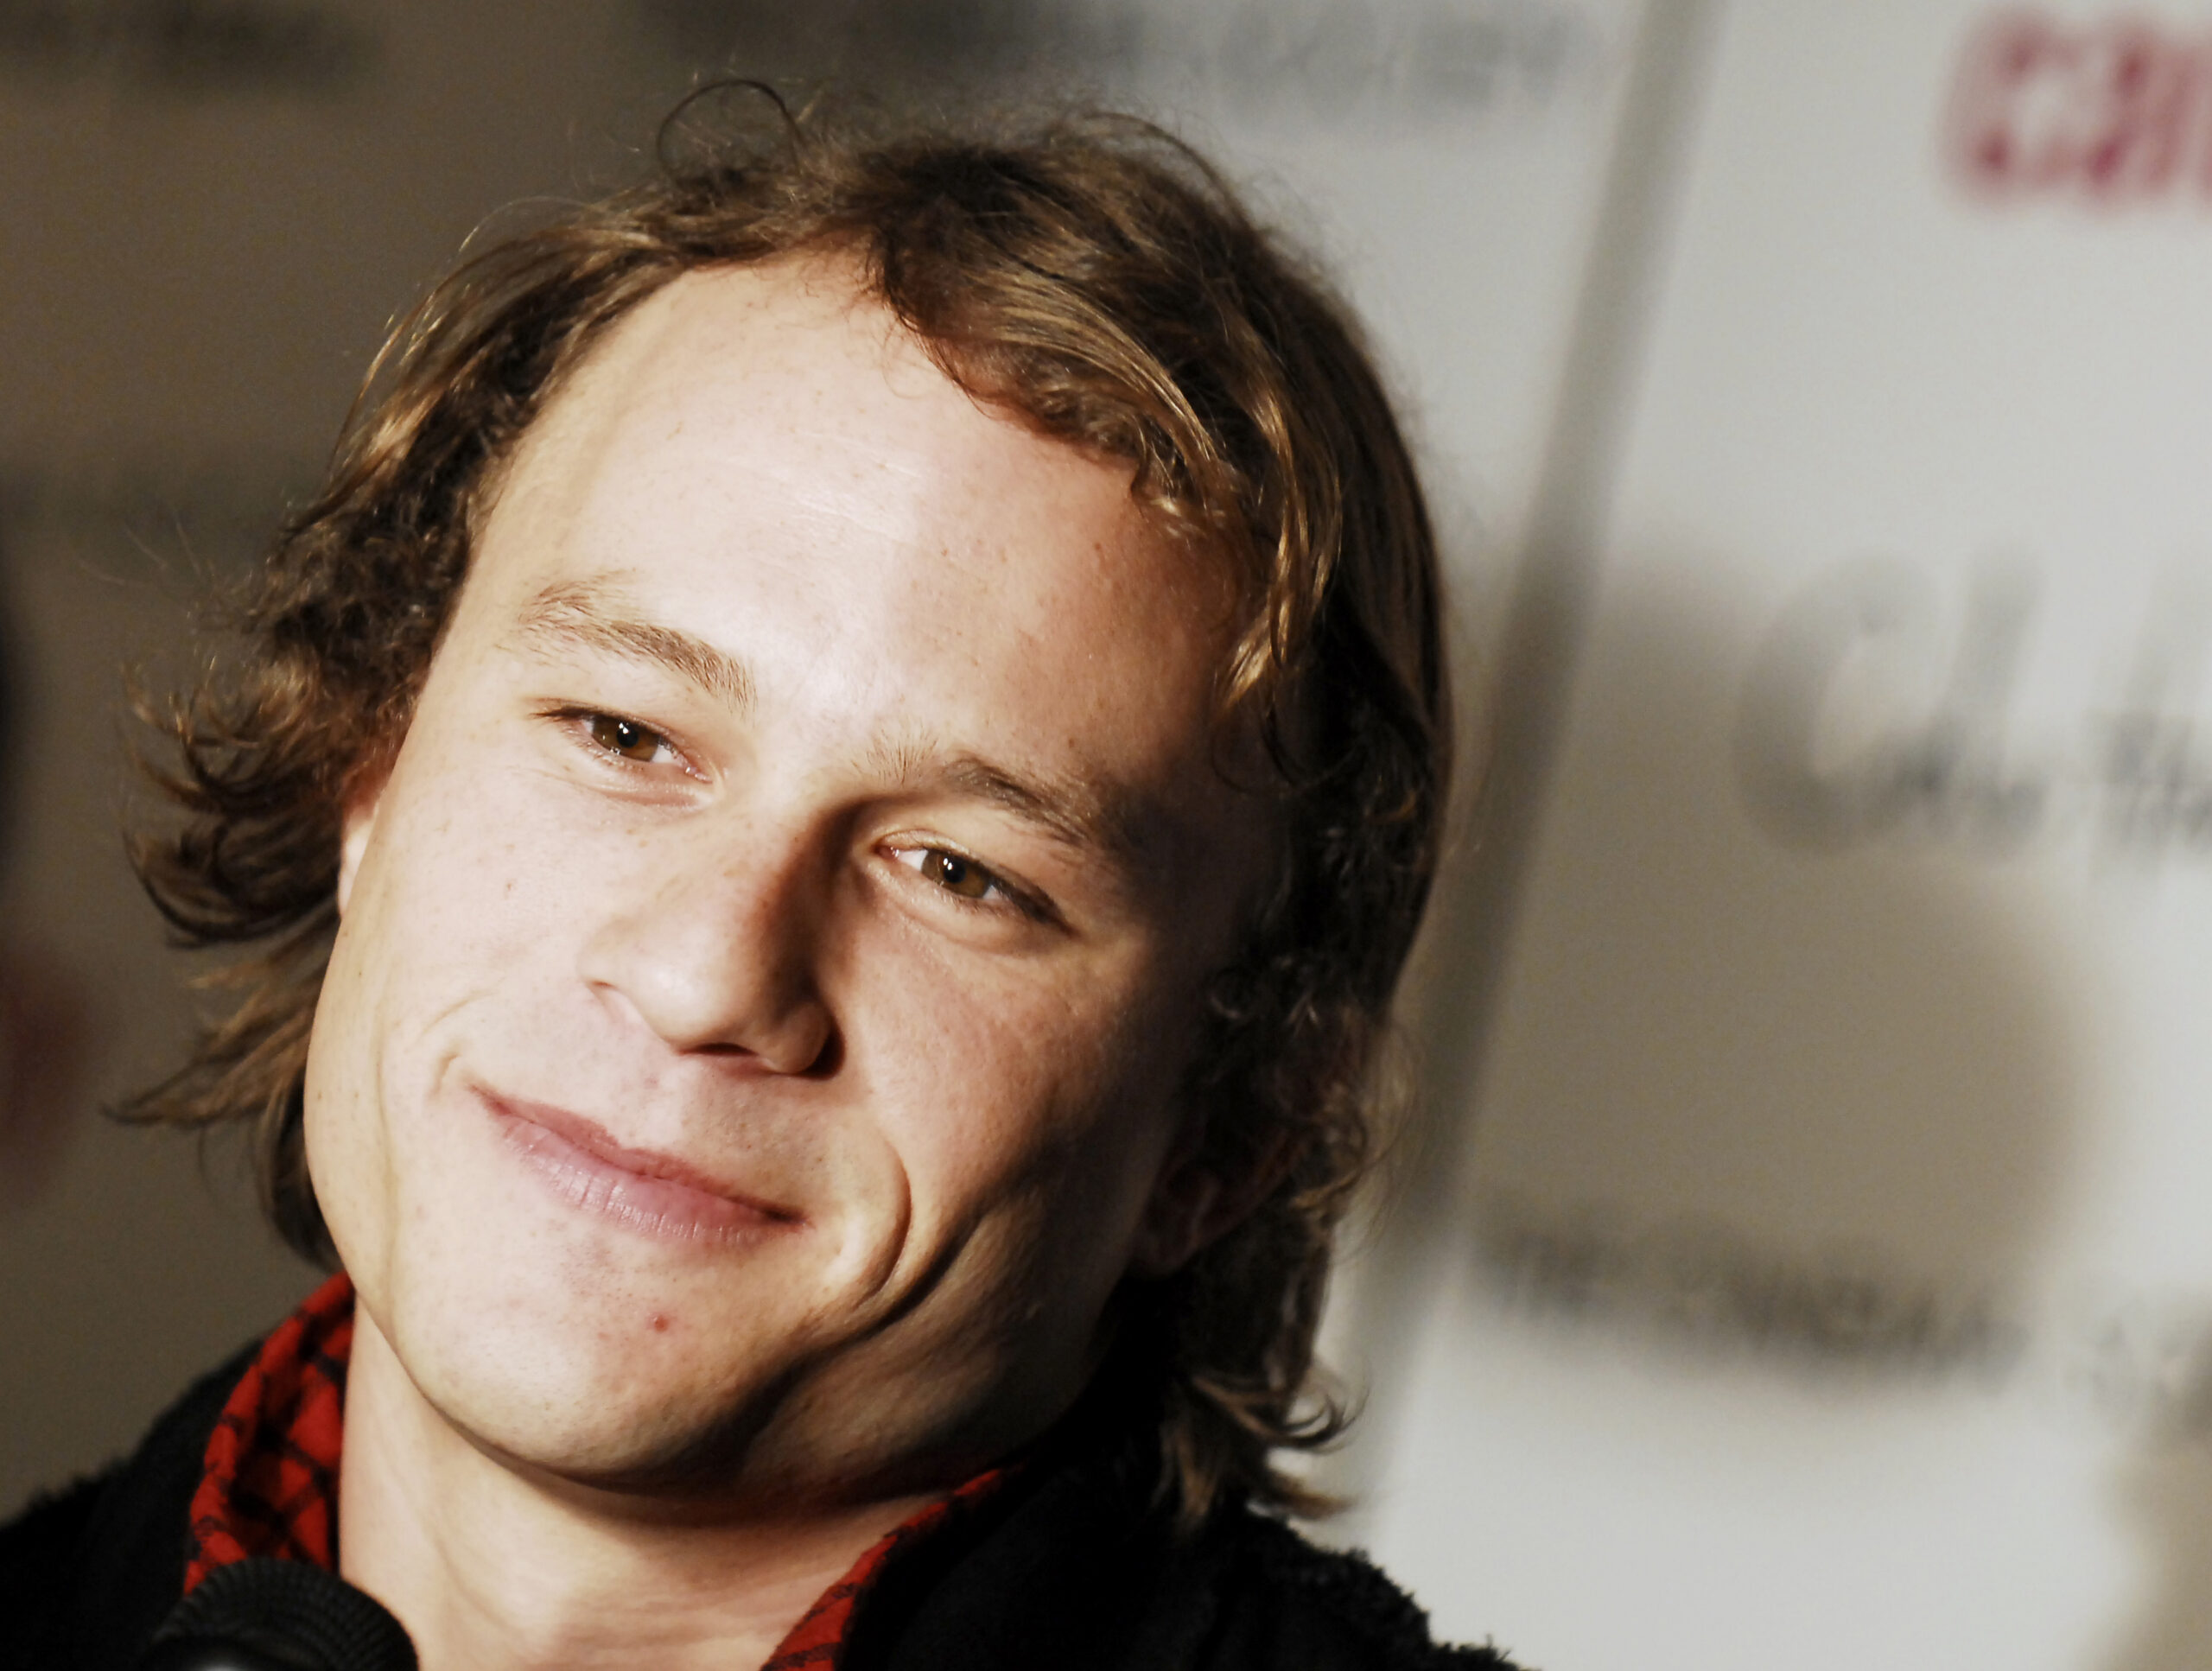 Heath Ledger’s dad: ‘something positive needs to come of this’